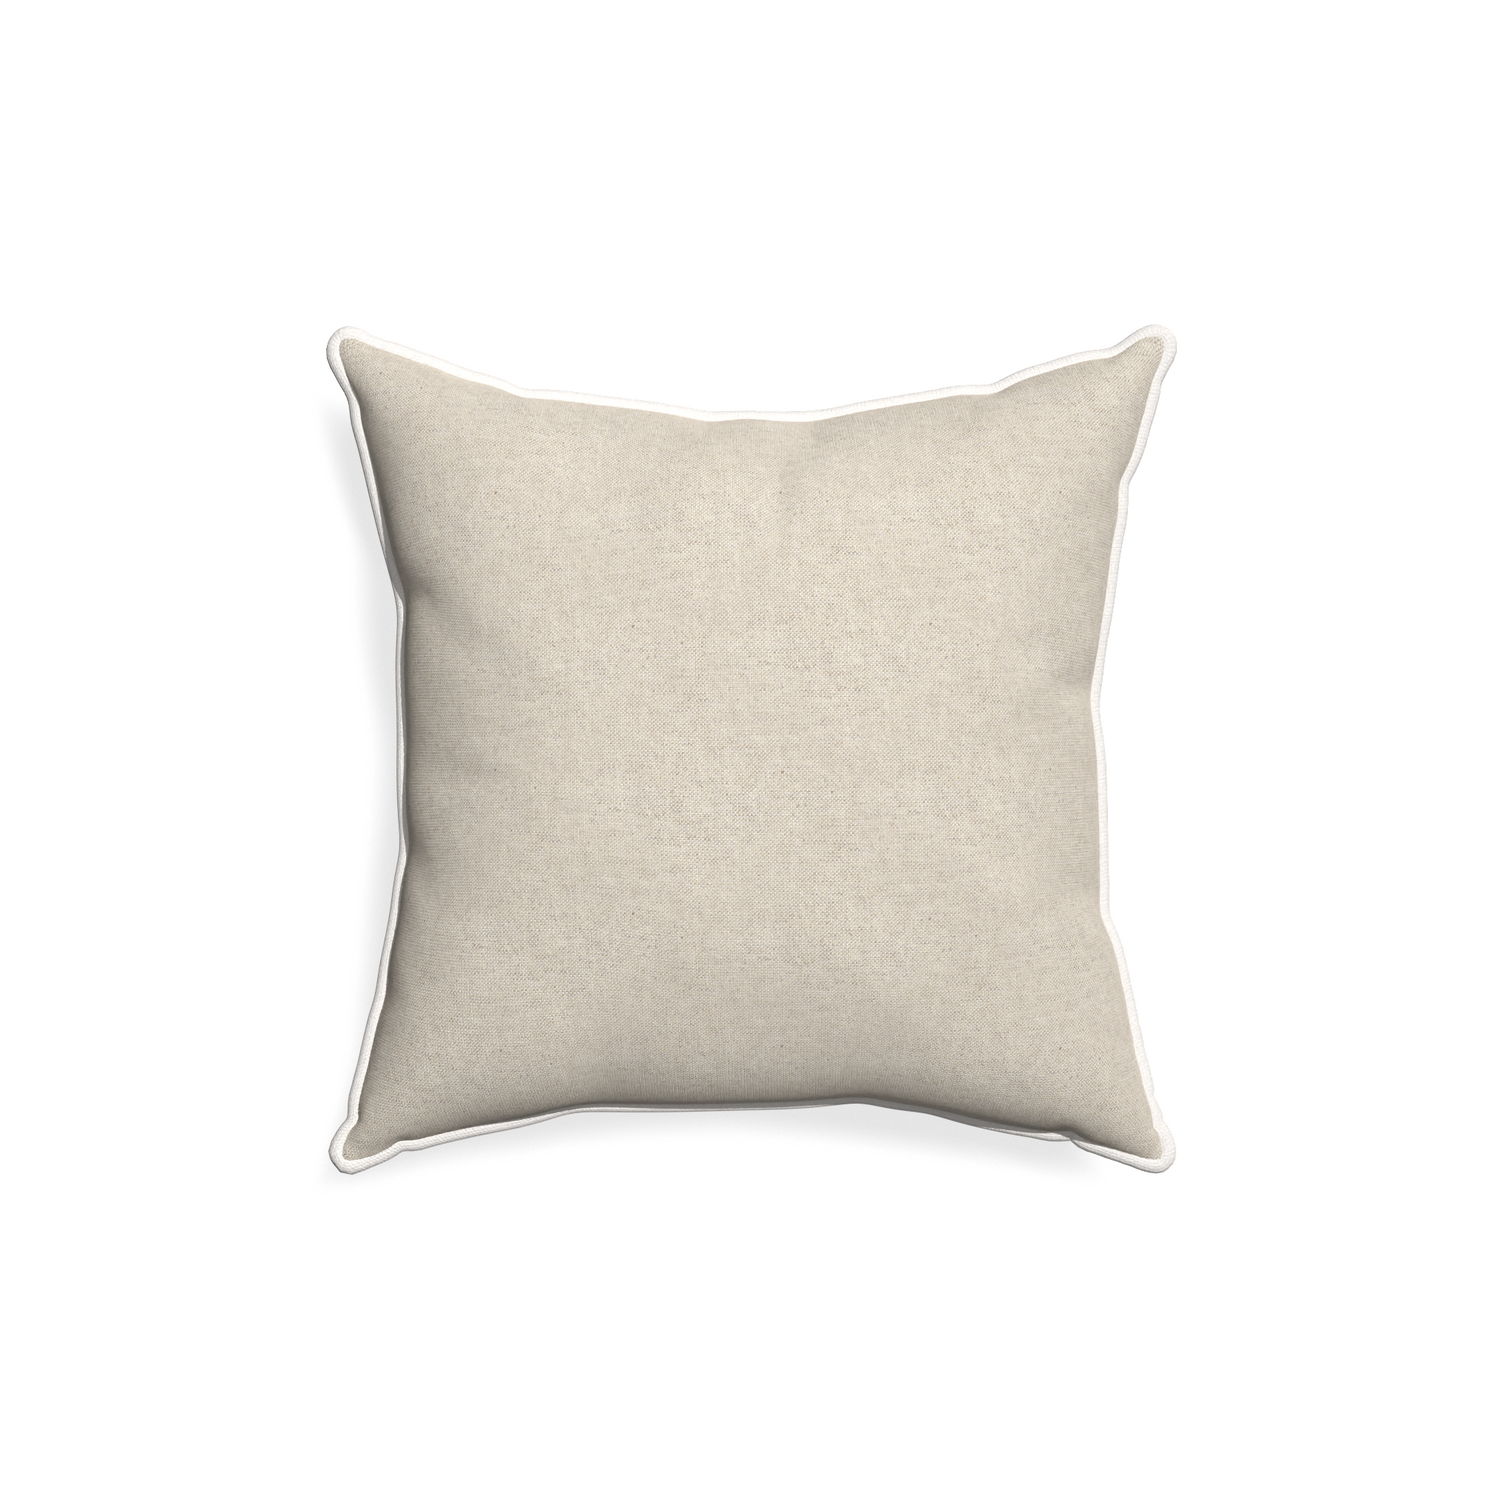 18-square oat custom light brownpillow with snow piping on white background